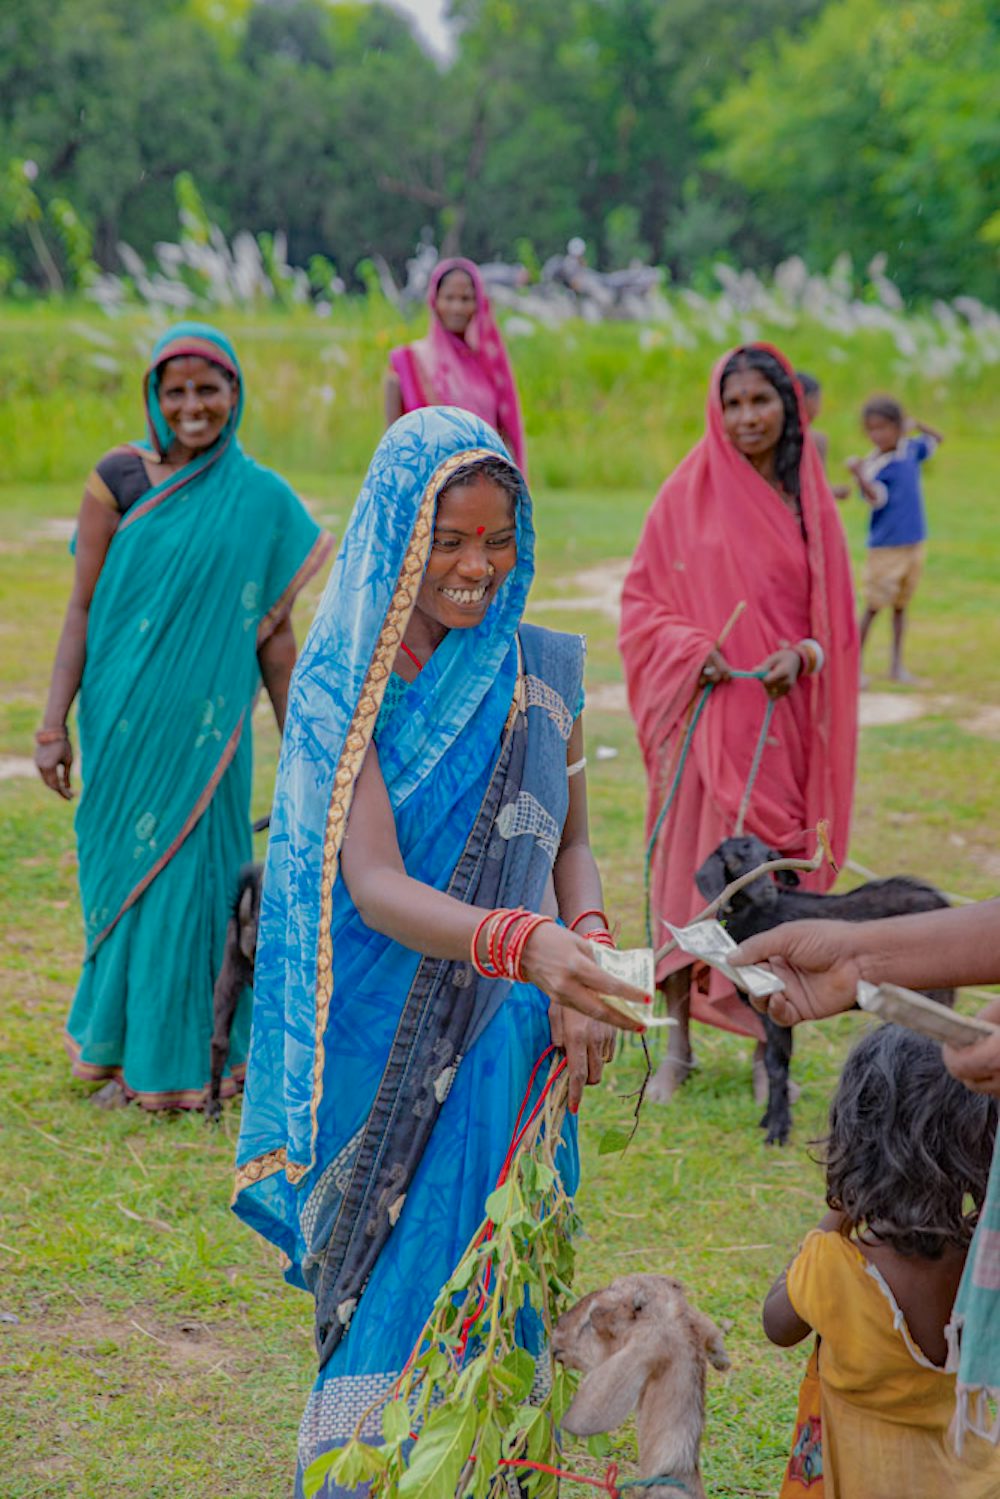 A woman in a blue saree exchanges money in a rural setting with goats and other villagers around her.